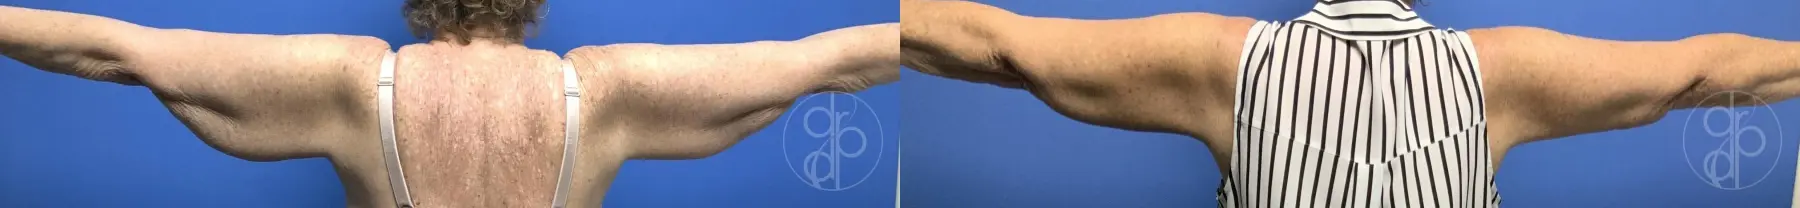 patient 13426 brachioplasty before and after result - Before and After 3